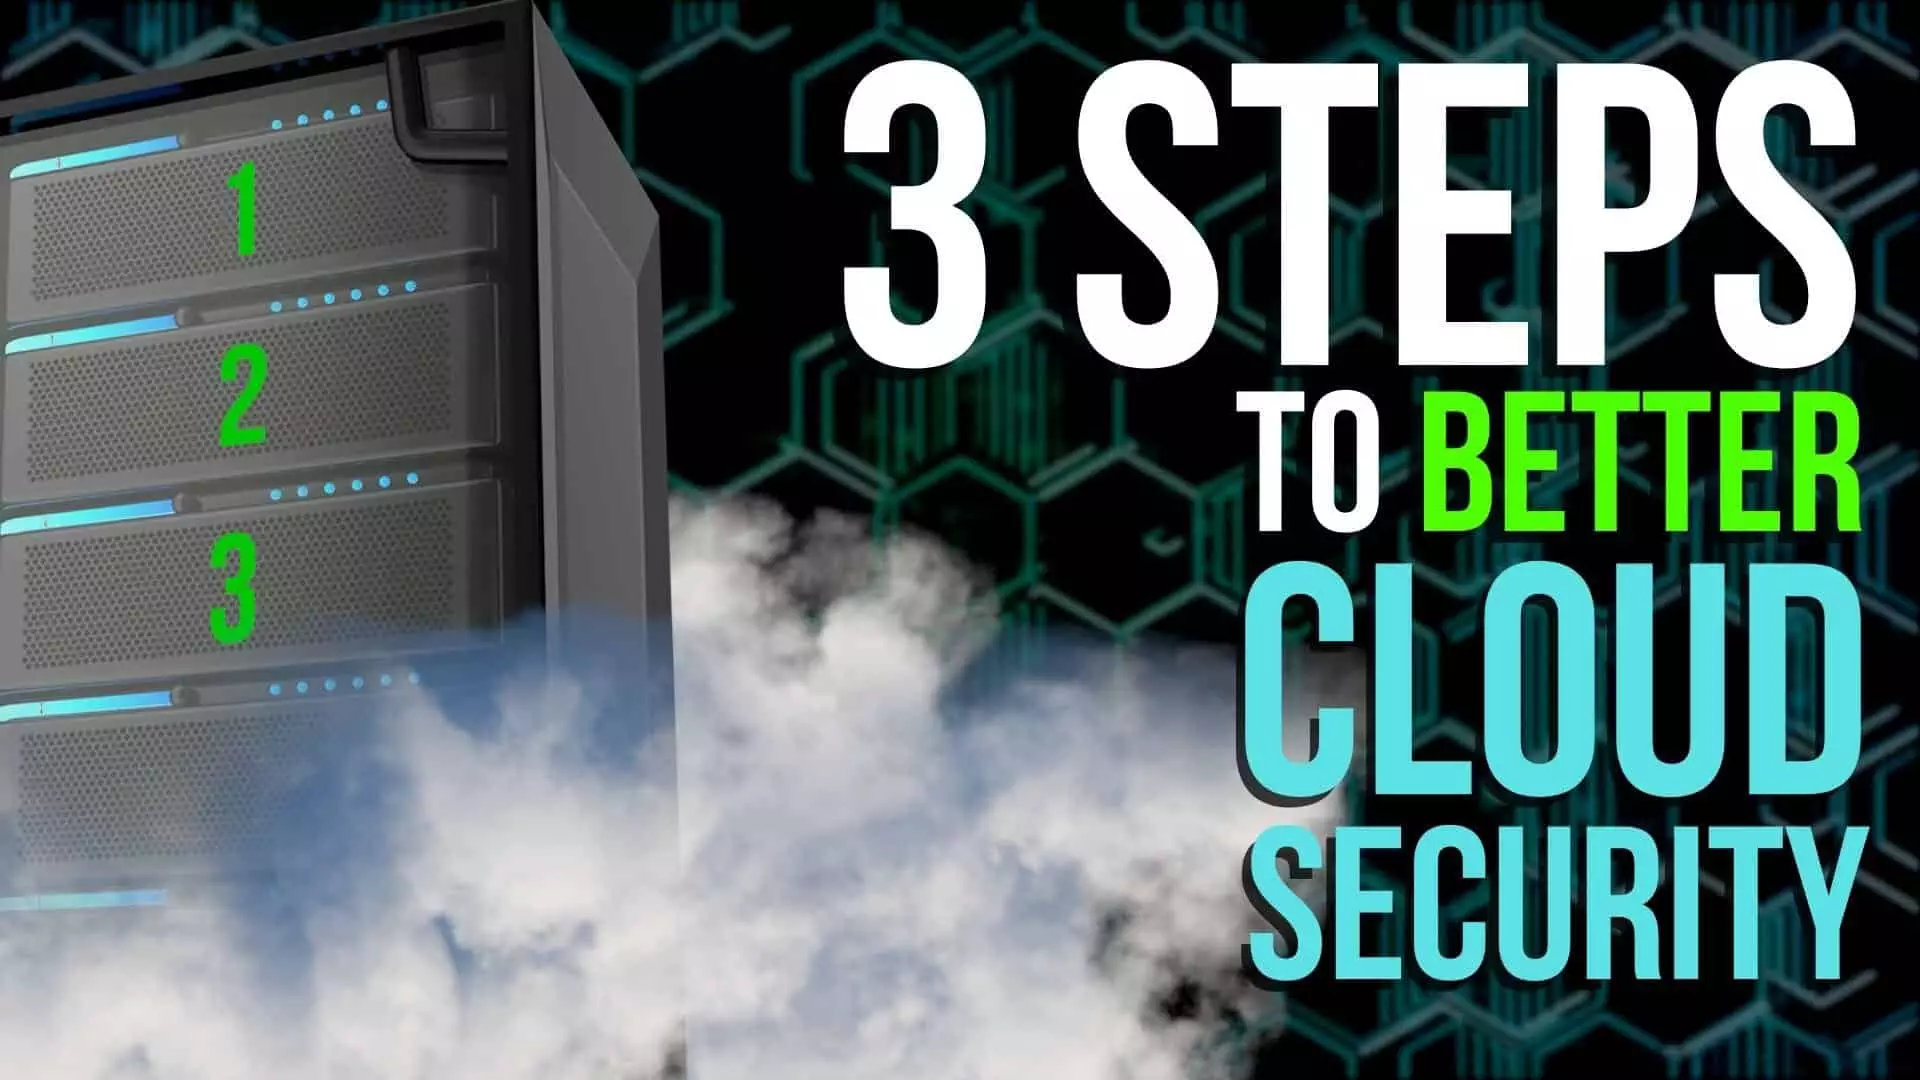 Just How Secure Is the Cloud? What You Need to Know {FREE Guide Download} cover